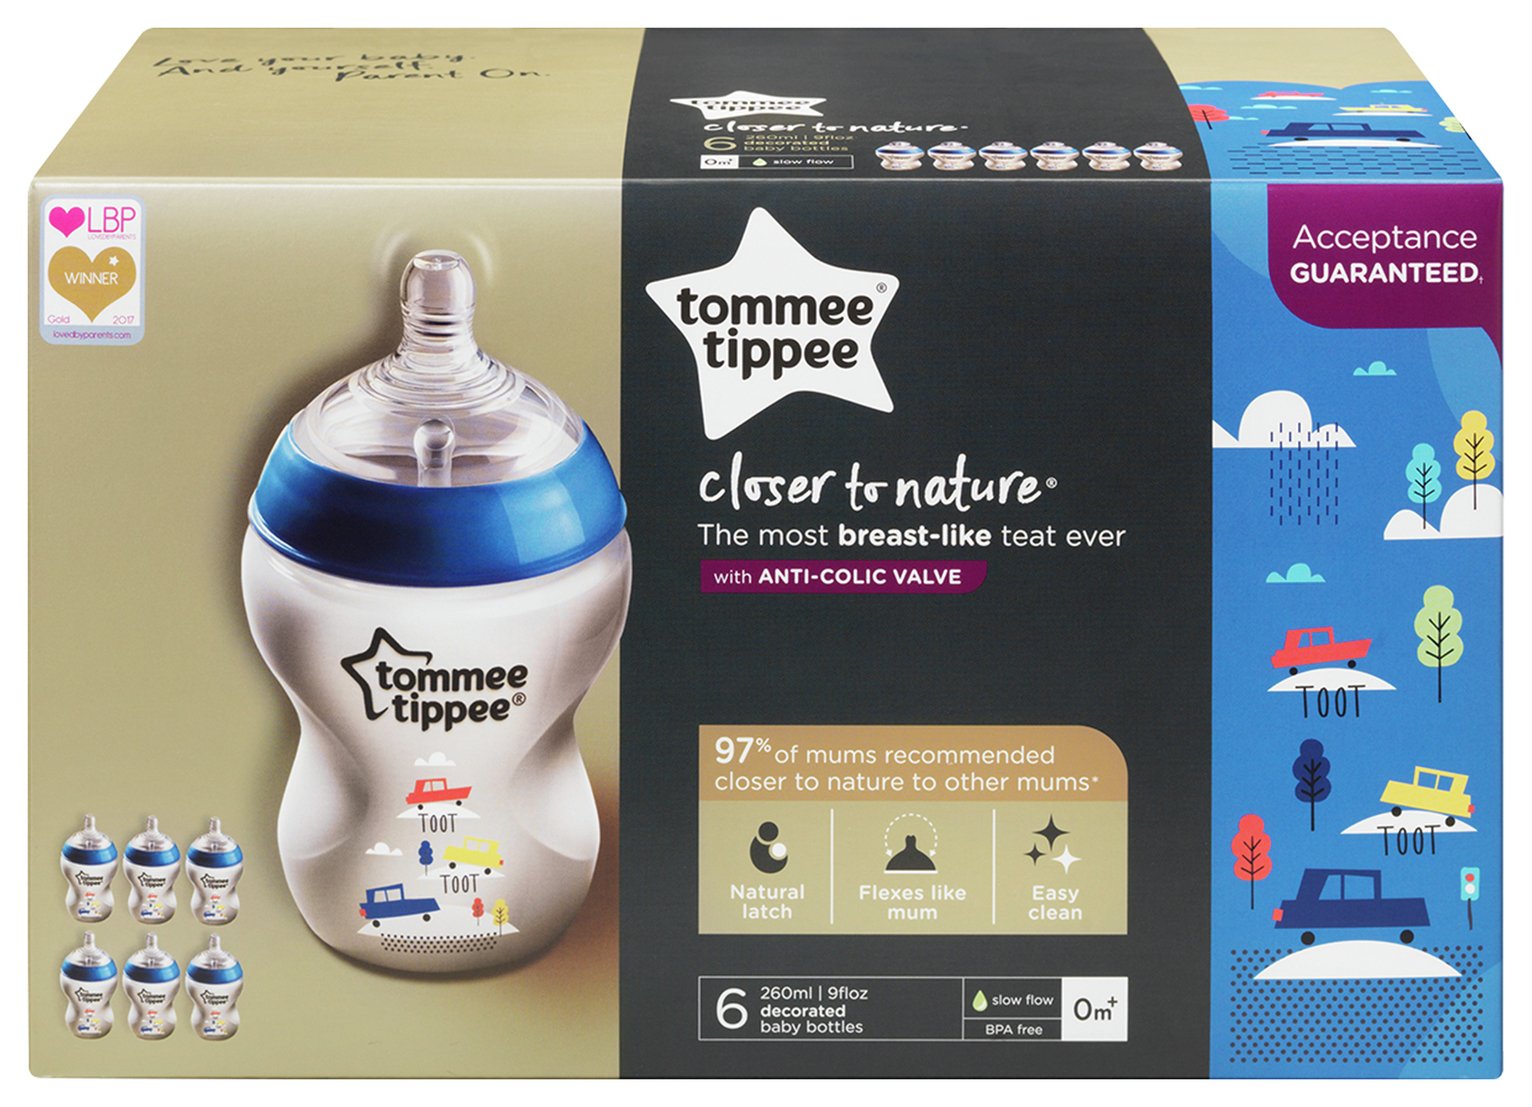 Tommee Tippee Closer to Nature Decorated Bottles 260ml x 6 Review